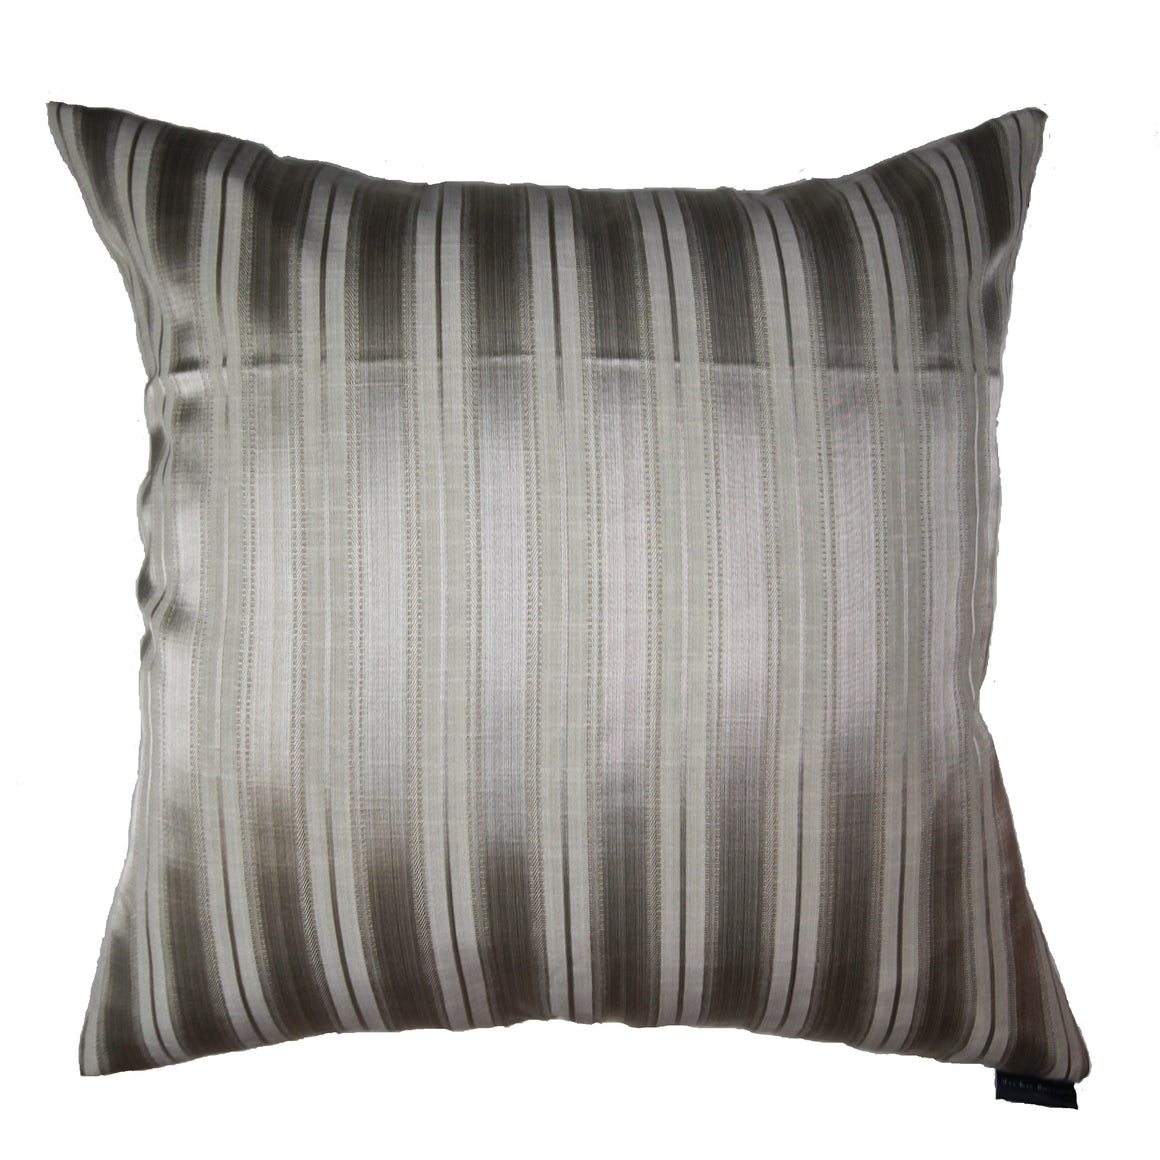 Giovanni - Stripped Beige Pillow Cover - 22x22 - 24x24 - 26x26